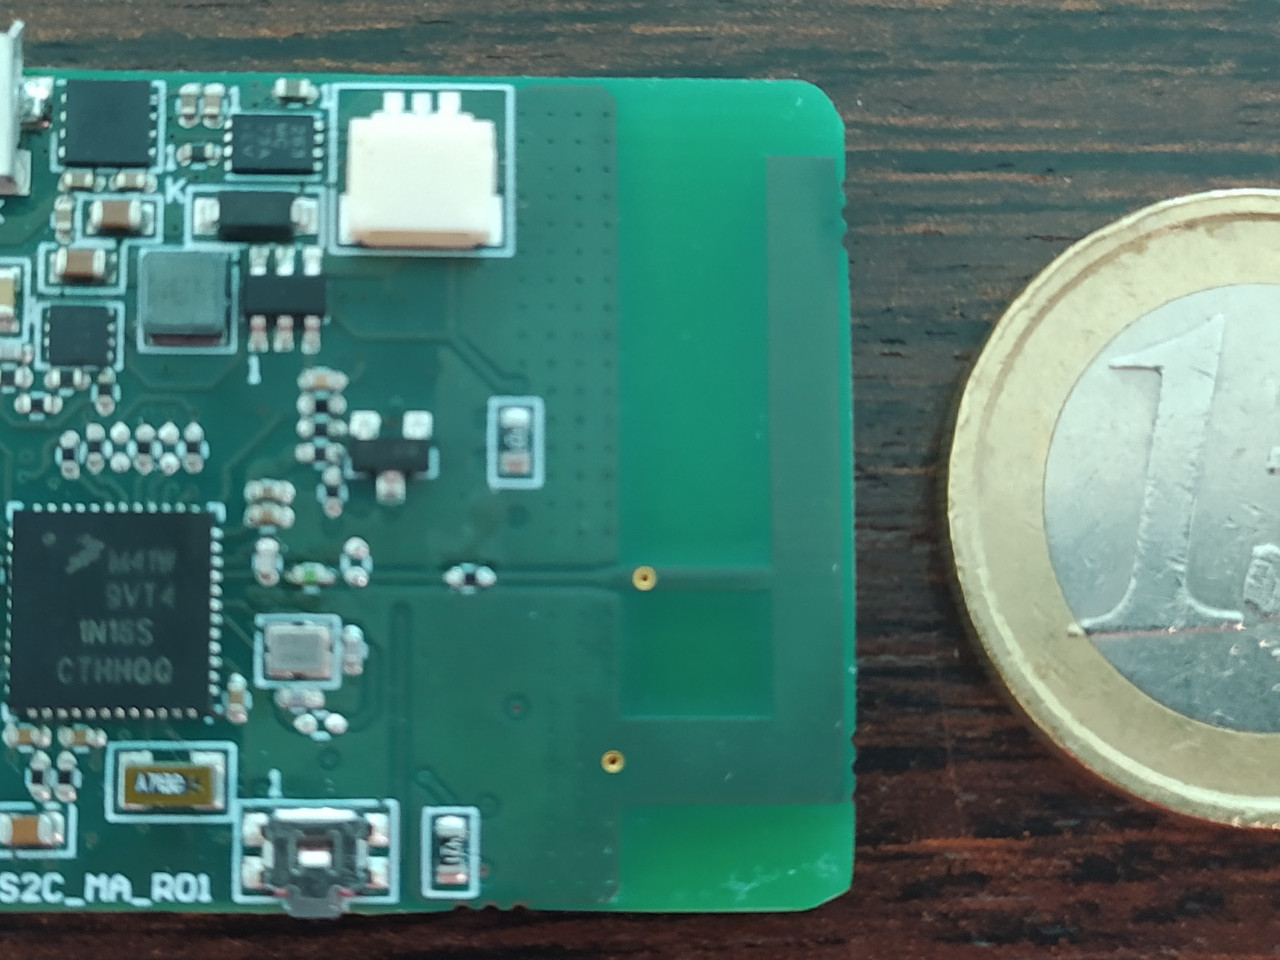 Wireless inertial unit: the dimensions are 40 mm x 30 mm, the weight is 20 g.